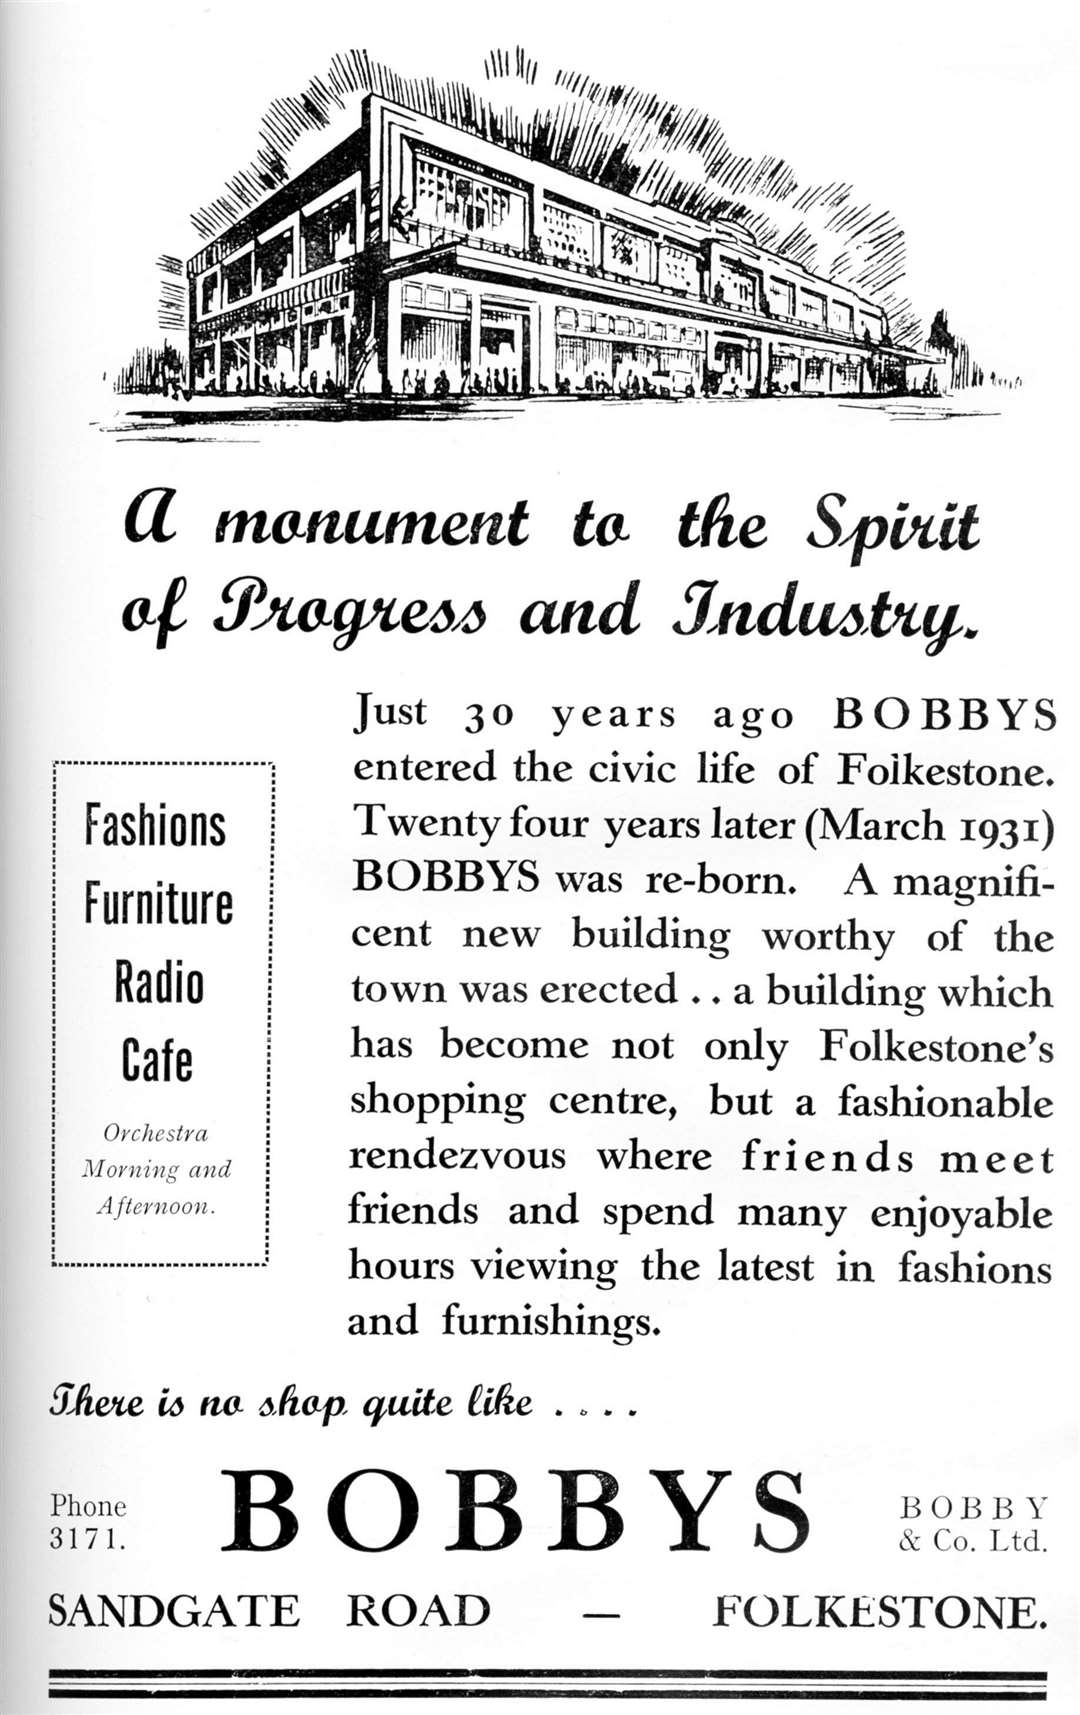 An advert for Bobbys from Folkestone Chamber of Commerce Directory in the 1930s.